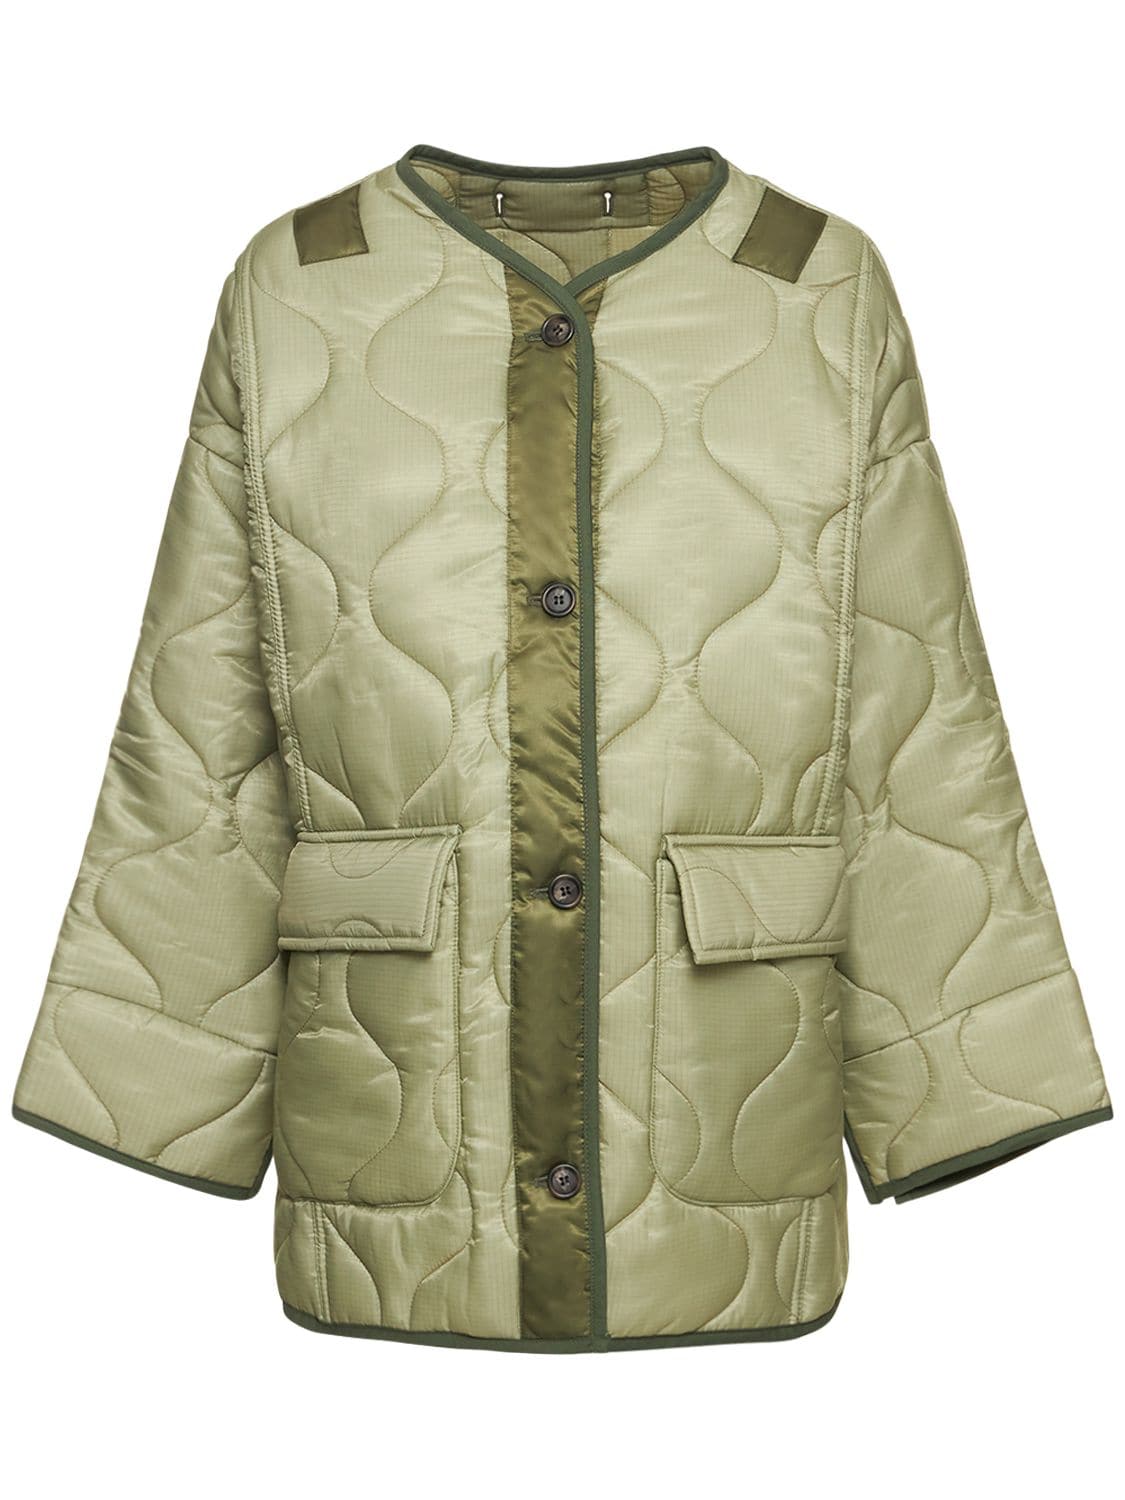 THE FRANKIE SHOP TEDDY QUILTED NYLON JACKET